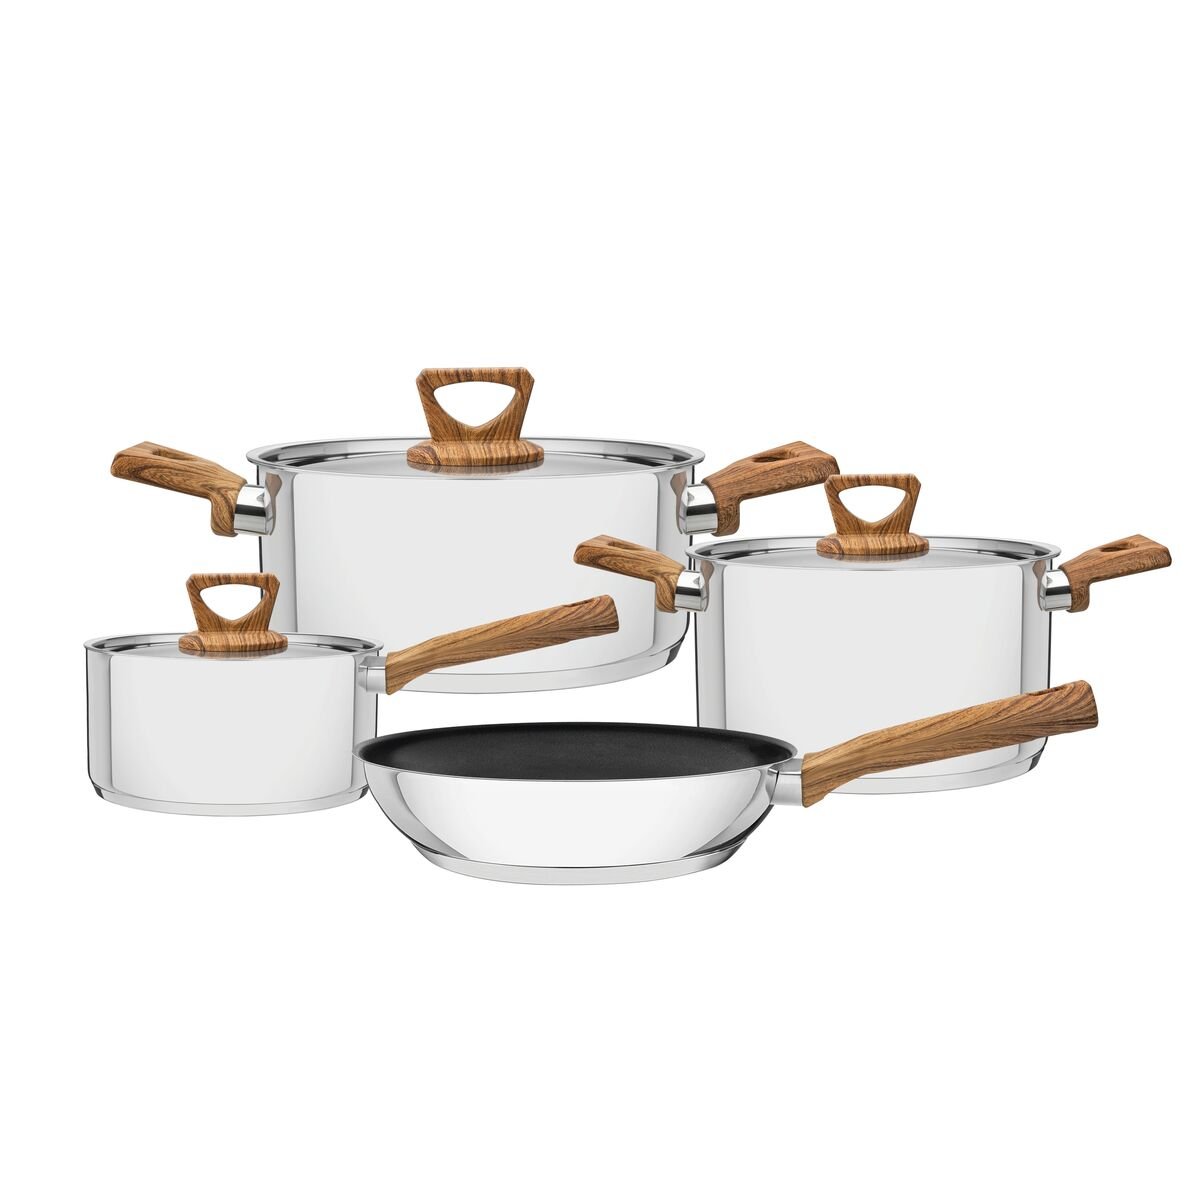 Tramontina Brava non-stick stainless steel cookware set with tri-ply base and faux wood handles, 4 pc set